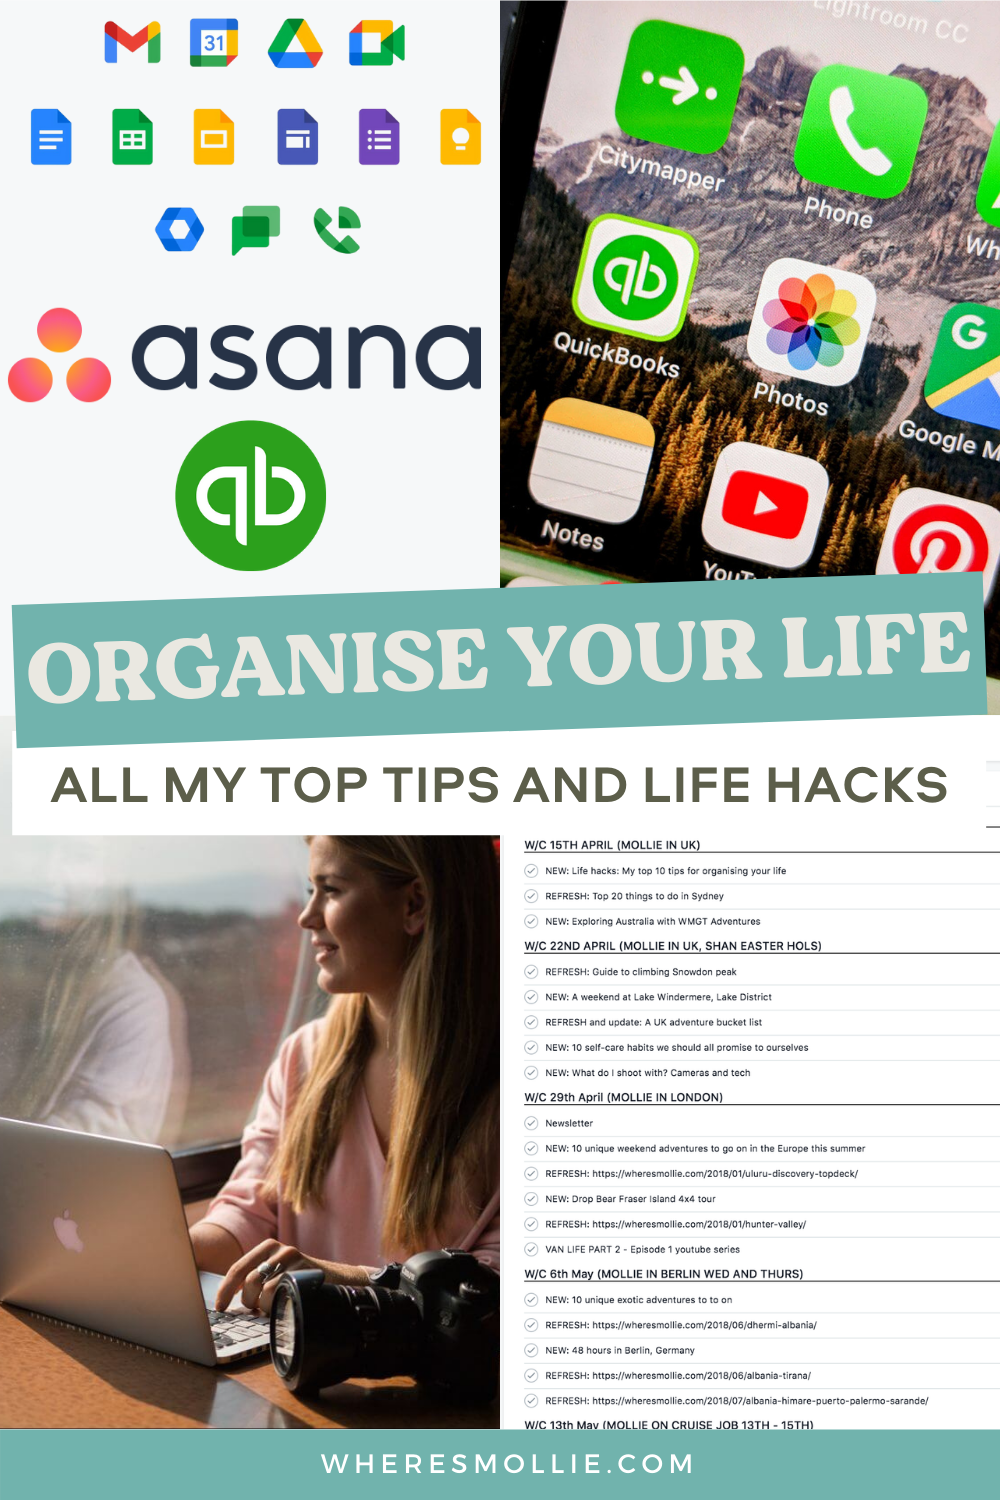 My top 10 tips and apps for organising your life